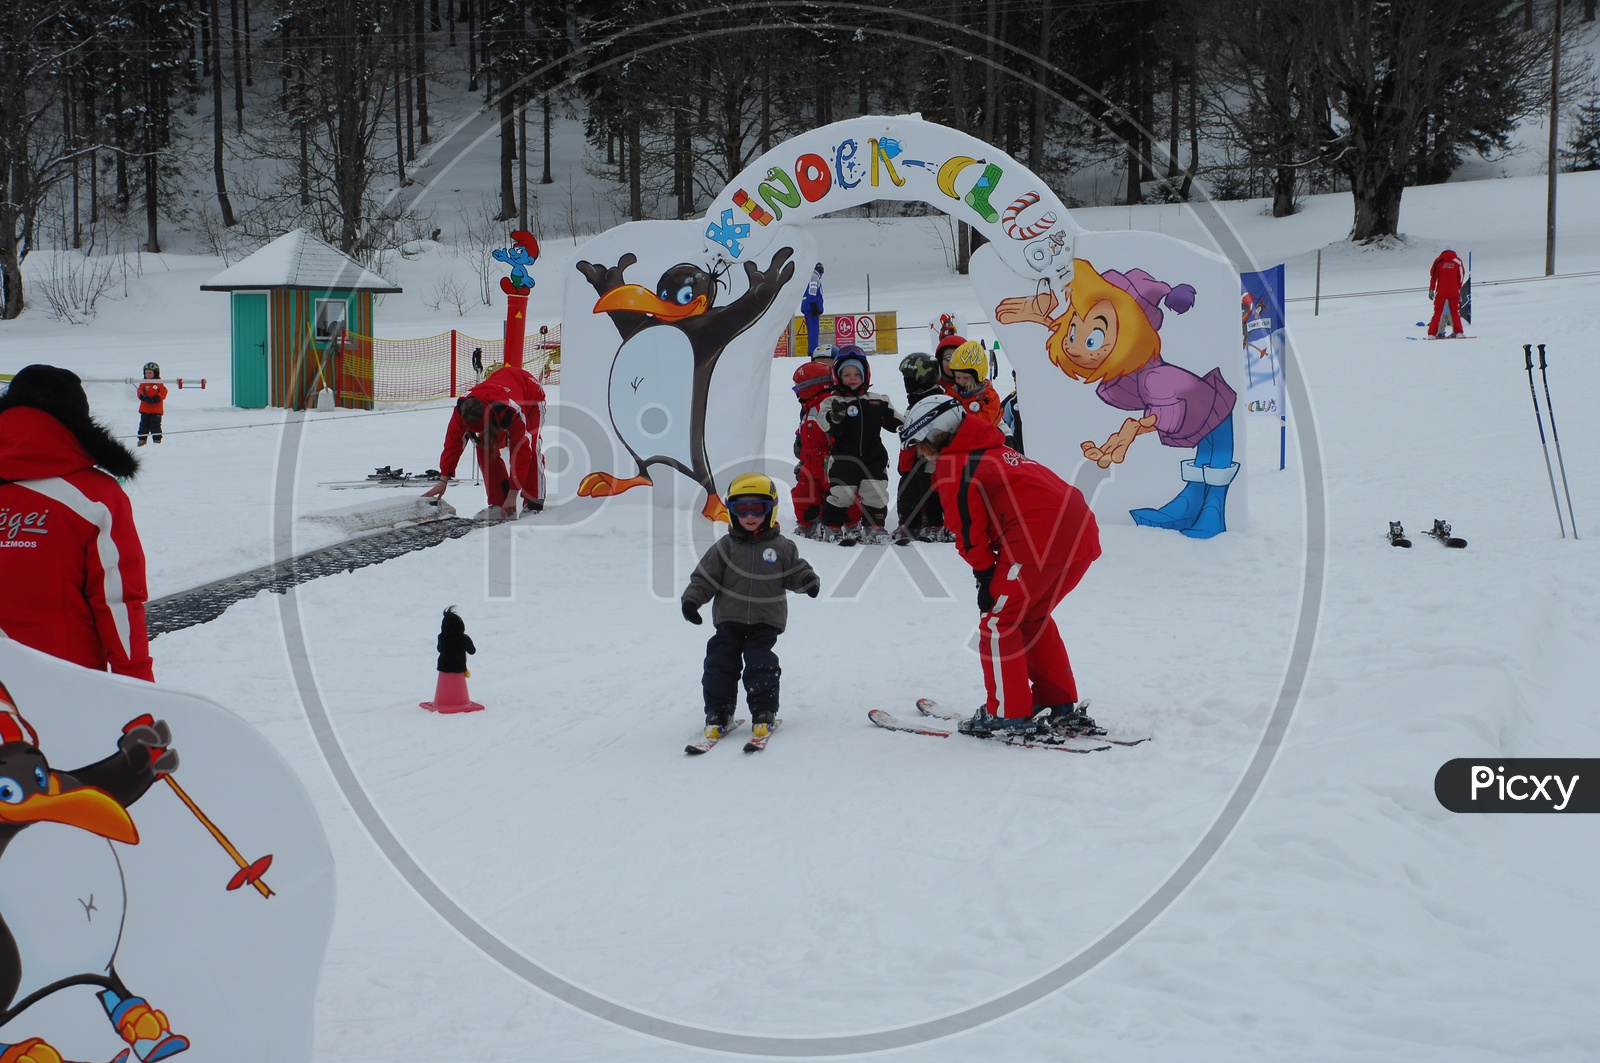 Kids Learning The Snow Skiing  in Kinder Club in Snow Of Swiss